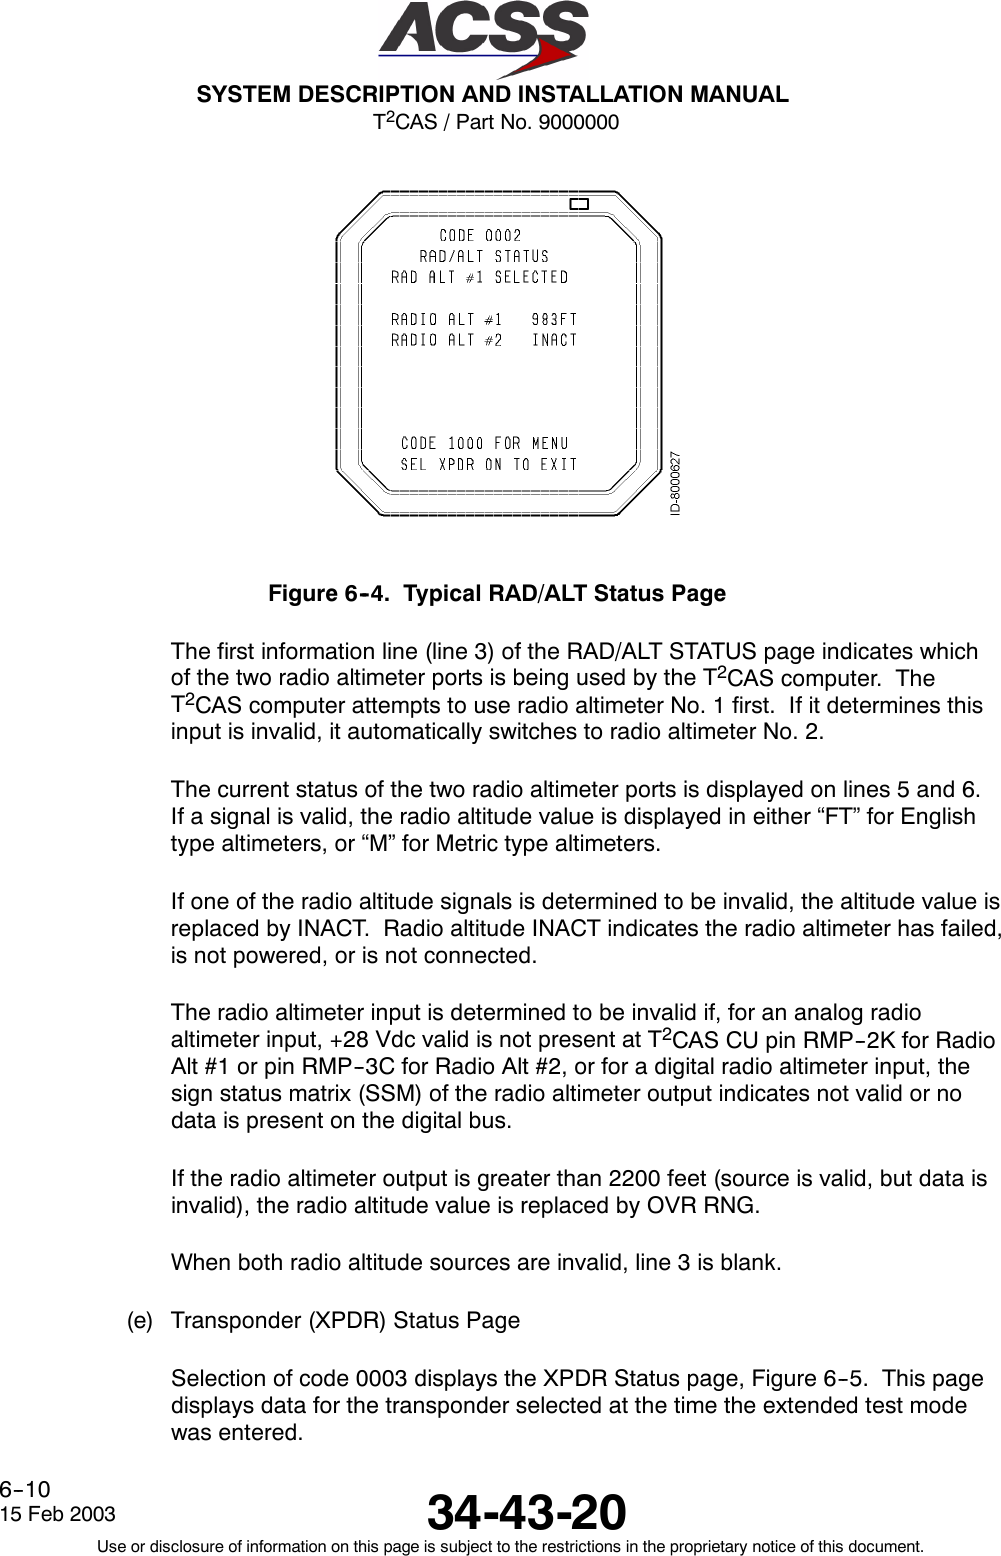 T2CAS / Part No. 9000000SYSTEM DESCRIPTION AND INSTALLATION MANUAL34-43-2015 Feb 2003Use or disclosure of information on this page is subject to the restrictions in the proprietary notice of this document.6--10Figure 6--4. Typical RAD/ALT Status PageThe first information line (line 3) of the RAD/ALT STATUS page indicates whichof the two radio altimeter ports is being used by the T2CAS computer. TheT2CAS computer attempts to use radio altimeter No. 1 first. If it determines thisinput is invalid, it automatically switches to radio altimeter No. 2.The current status of the two radio altimeter ports is displayed on lines 5 and 6.If a signal is valid, the radio altitude value is displayed in either “FT” for Englishtype altimeters, or “M” for Metric type altimeters.If one of the radio altitude signals is determined to be invalid, the altitude value isreplaced by INACT. Radio altitude INACT indicates the radio altimeter has failed,is not powered, or is not connected.The radio altimeter input is determined to be invalid if, for an analog radioaltimeter input, +28 Vdc valid is not present at T2CAS CU pin RMP--2K for RadioAlt #1 or pin RMP--3C for Radio Alt #2, or for a digital radio altimeter input, thesign status matrix (SSM) of the radio altimeter output indicates not valid or nodata is present on the digital bus.If the radio altimeter output is greater than 2200 feet (source is valid, but data isinvalid), the radio altitude value is replaced by OVR RNG.When both radio altitude sources are invalid, line 3 is blank.(e) Transponder (XPDR) Status PageSelection of code 0003 displays the XPDR Status page, Figure 6--5. This pagedisplays data for the transponder selected at the time the extended test modewas entered.